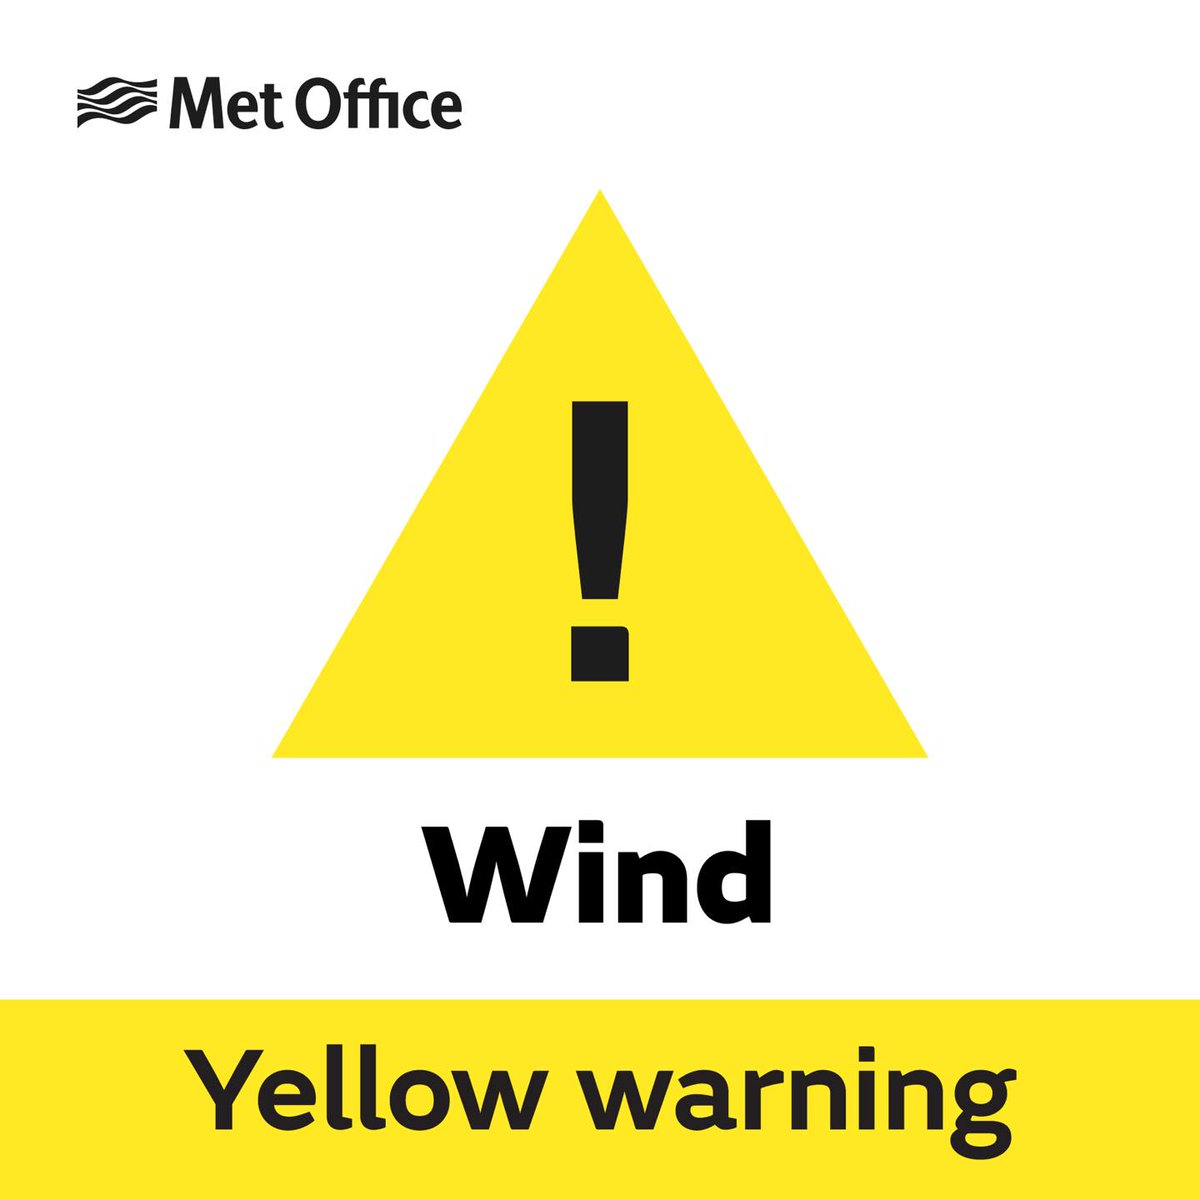 Reminder: A Yellow weather warning for Wind is in place until 10pm this evening. Please ensure all outdoor belongings are secured in the garden, and to stay #WeatherAware by keeping up to date with social media updates.